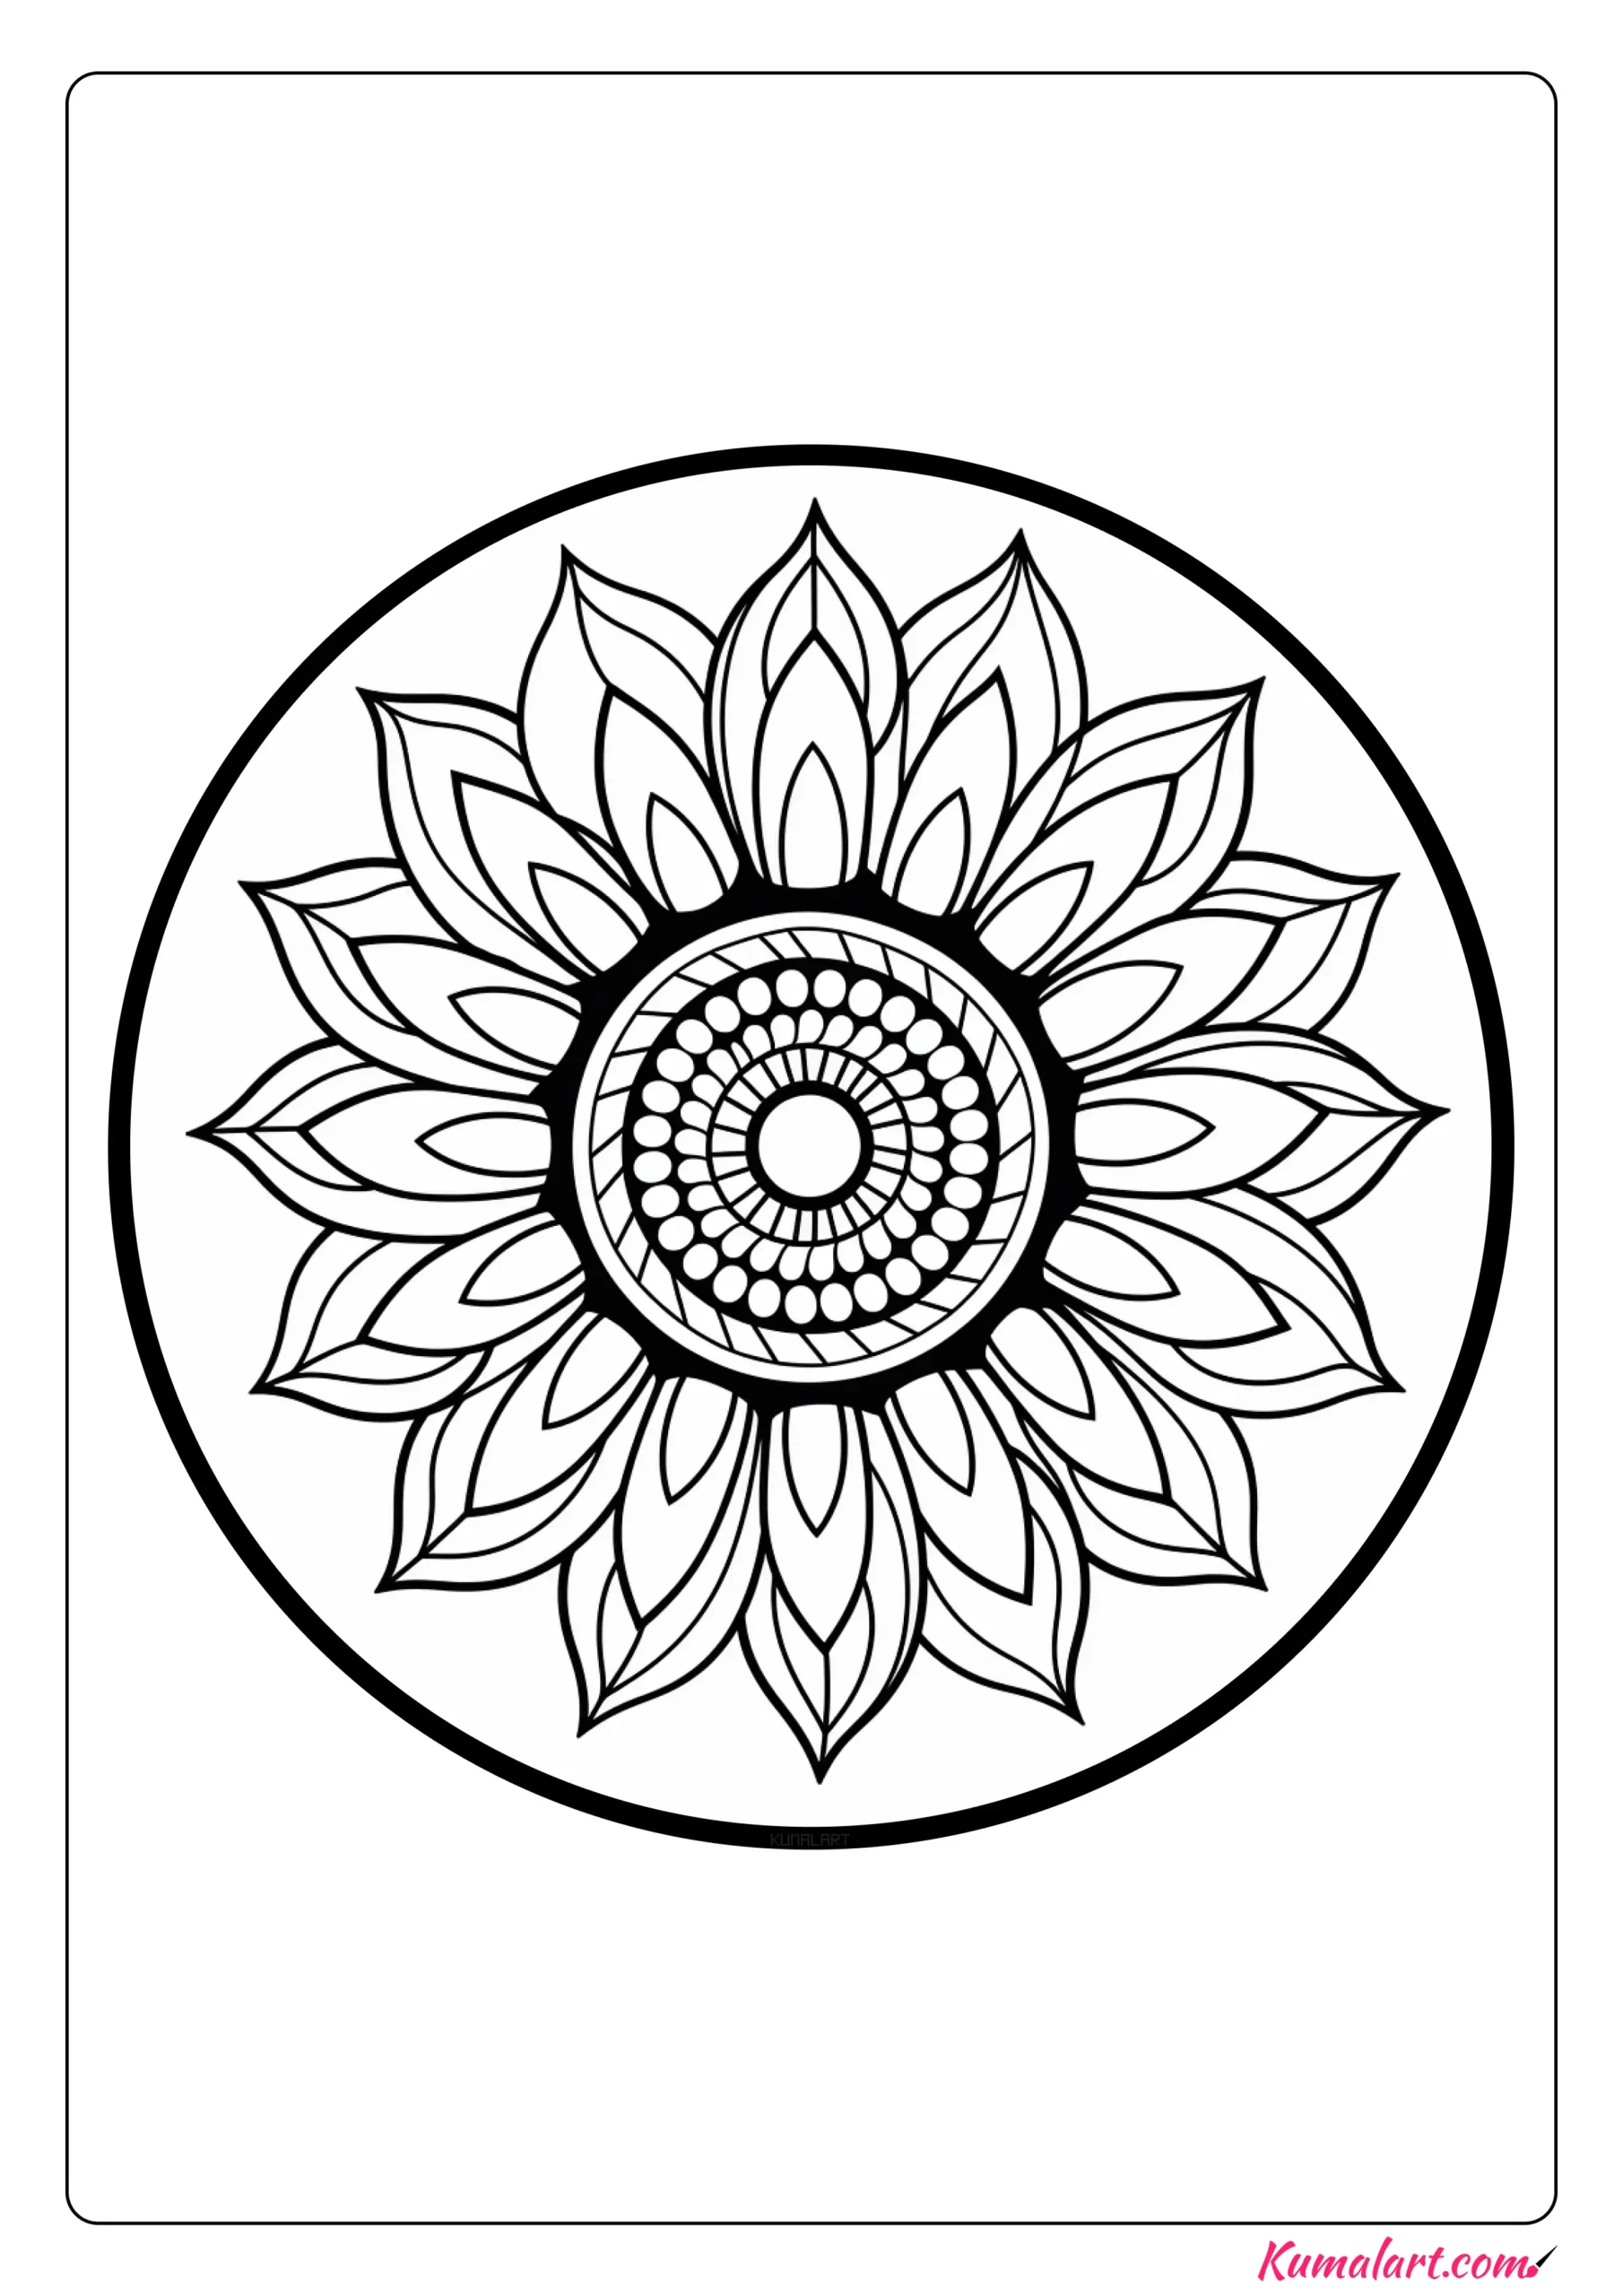 Abstract Sunflower Mandala Coloring Page